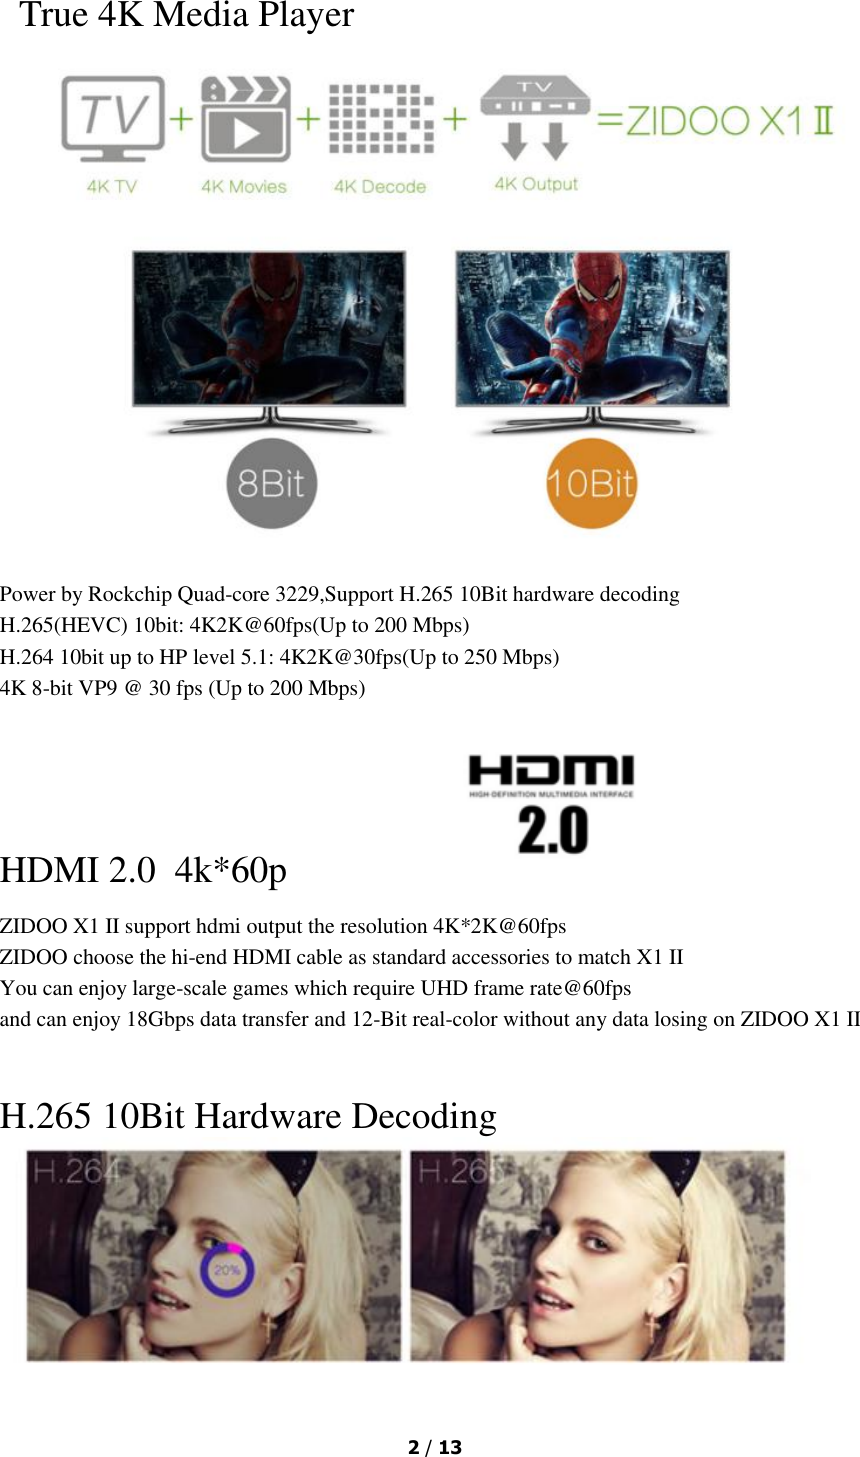  2 / 13   True 4K Media Player  Power by Rockchip Quad-core 3229,Support H.265 10Bit hardware decoding H.265(HEVC) 10bit: 4K2K@60fps(Up to 200 Mbps) H.264 10bit up to HP level 5.1: 4K2K@30fps(Up to 250 Mbps) 4K 8-bit VP9 @ 30 fps (Up to 200 Mbps) HDMI 2.0  4k*60p       ZIDOO X1 II support hdmi output the resolution 4K*2K@60fps ZIDOO choose the hi-end HDMI cable as standard accessories to match X1 II You can enjoy large-scale games which require UHD frame rate@60fps and can enjoy 18Gbps data transfer and 12-Bit real-color without any data losing on ZIDOO X1 II   H.265 10Bit Hardware Decoding  